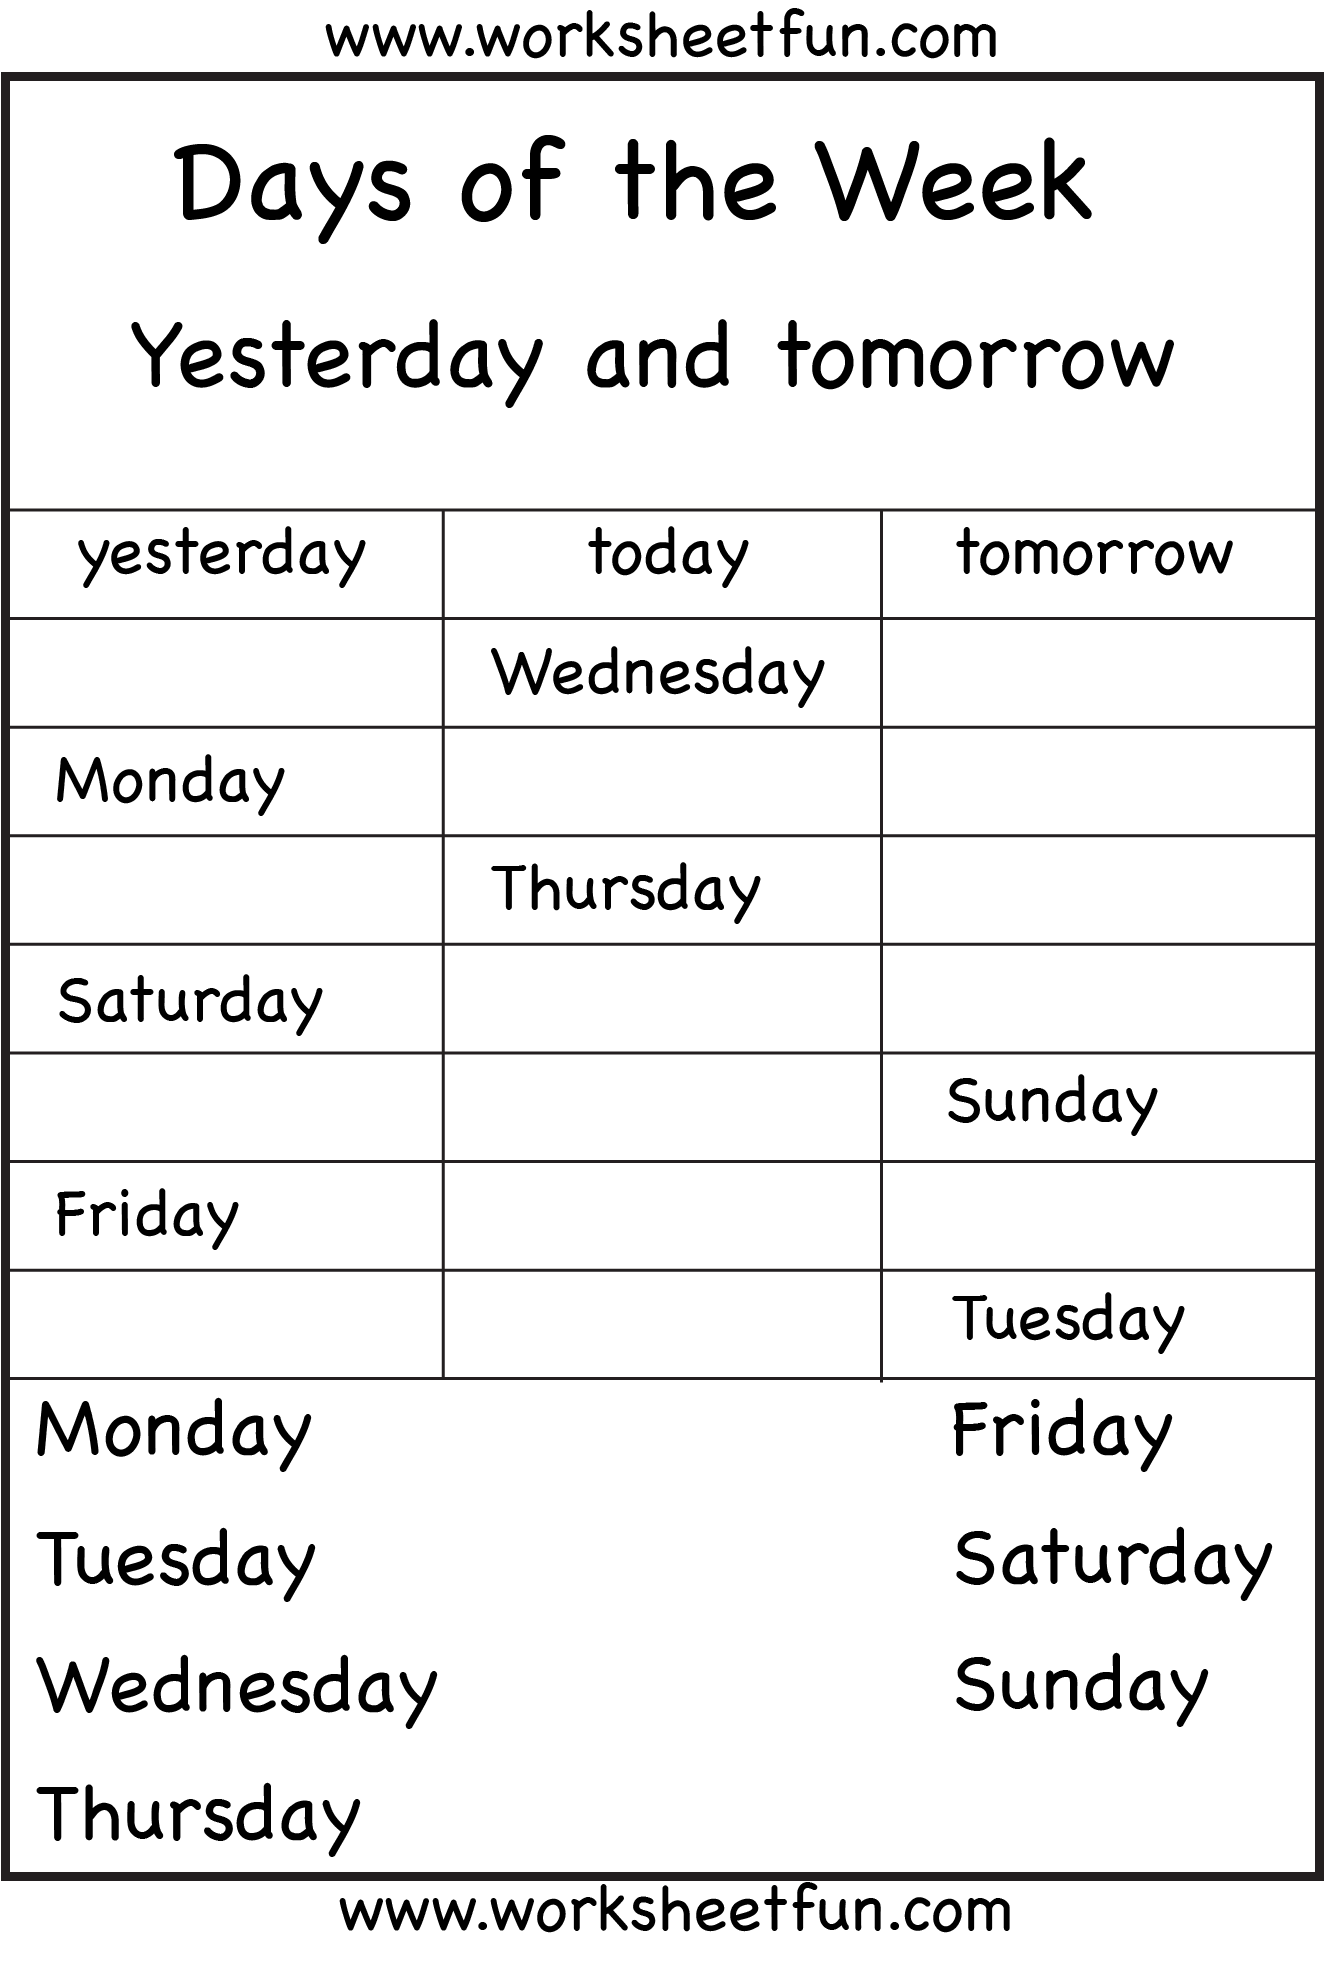 days-of-the-week-yesterday-and-tomorrow-6-worksheets-free